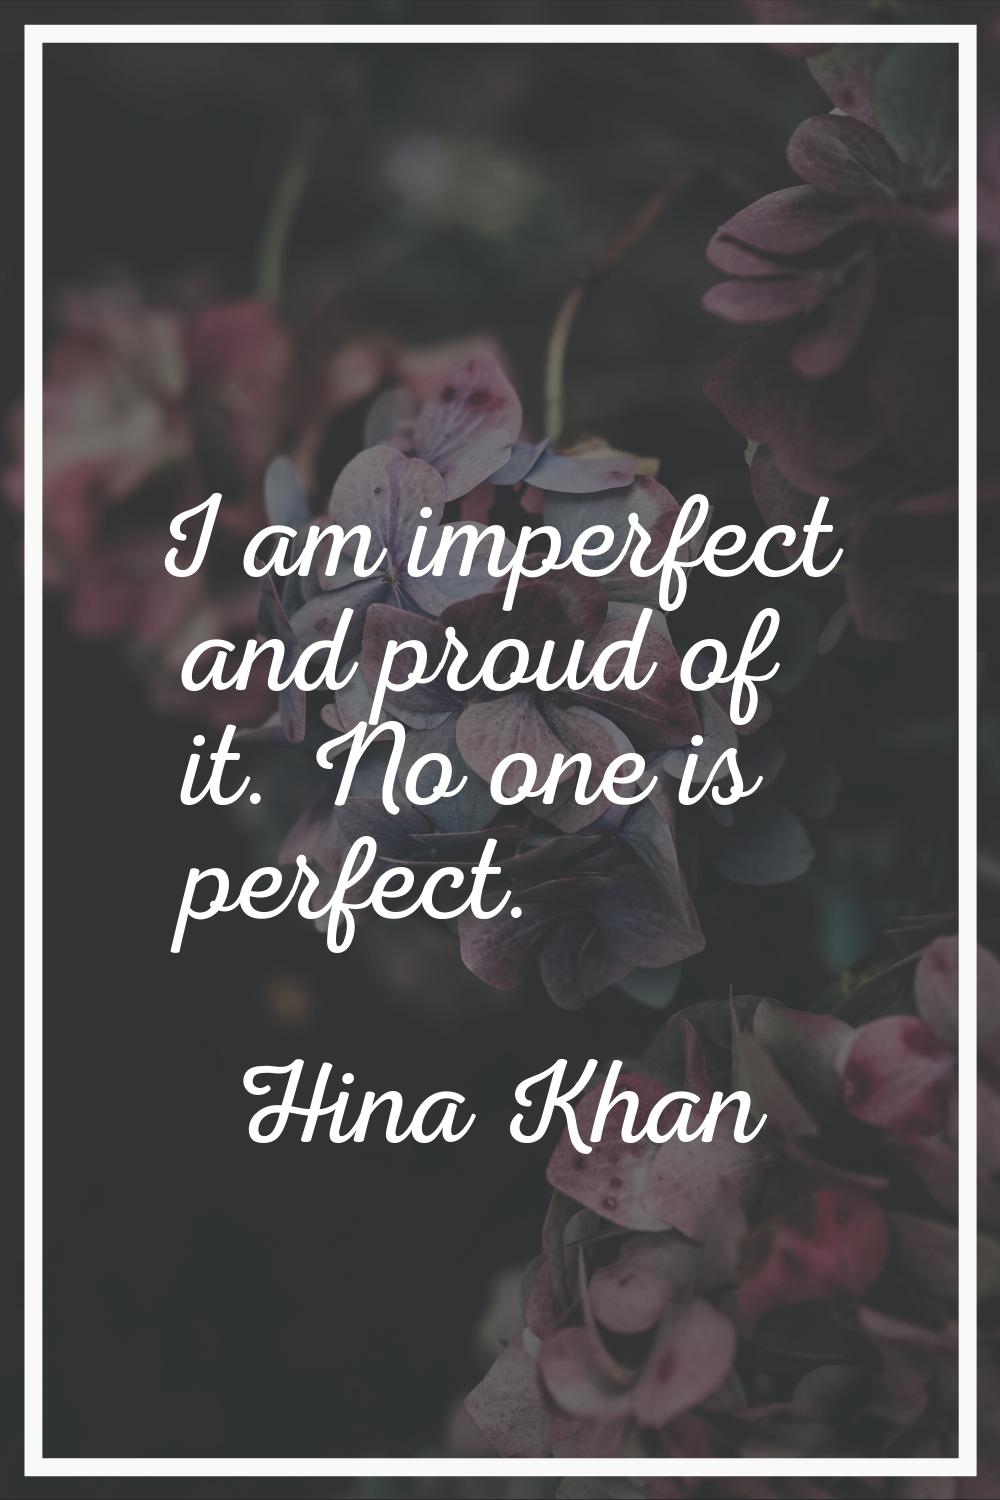 I am imperfect and proud of it. No one is perfect.